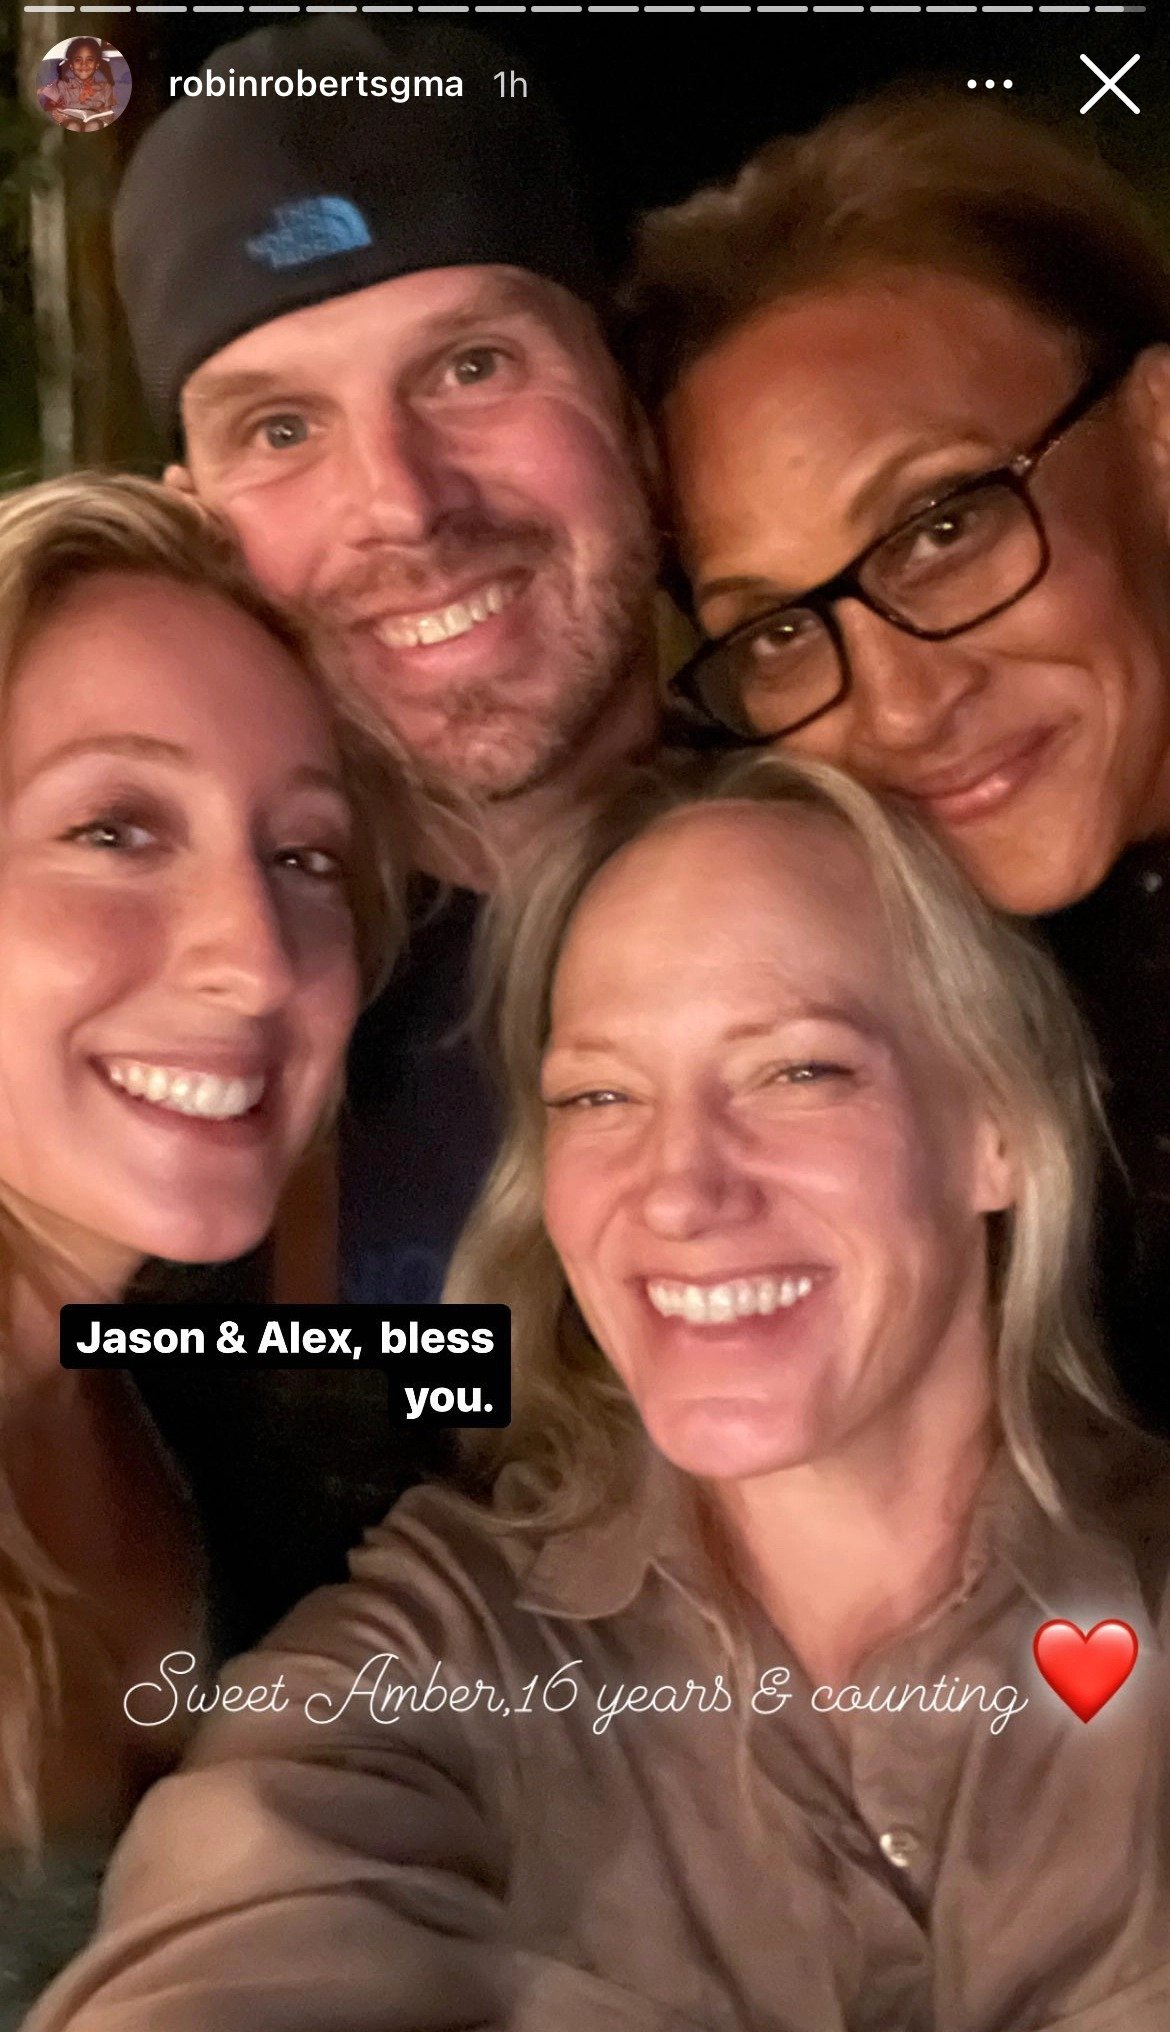 Robin Roberts and Amber Laign's photo with their two friends. | Photo: instagram.com/robinrobertsgma